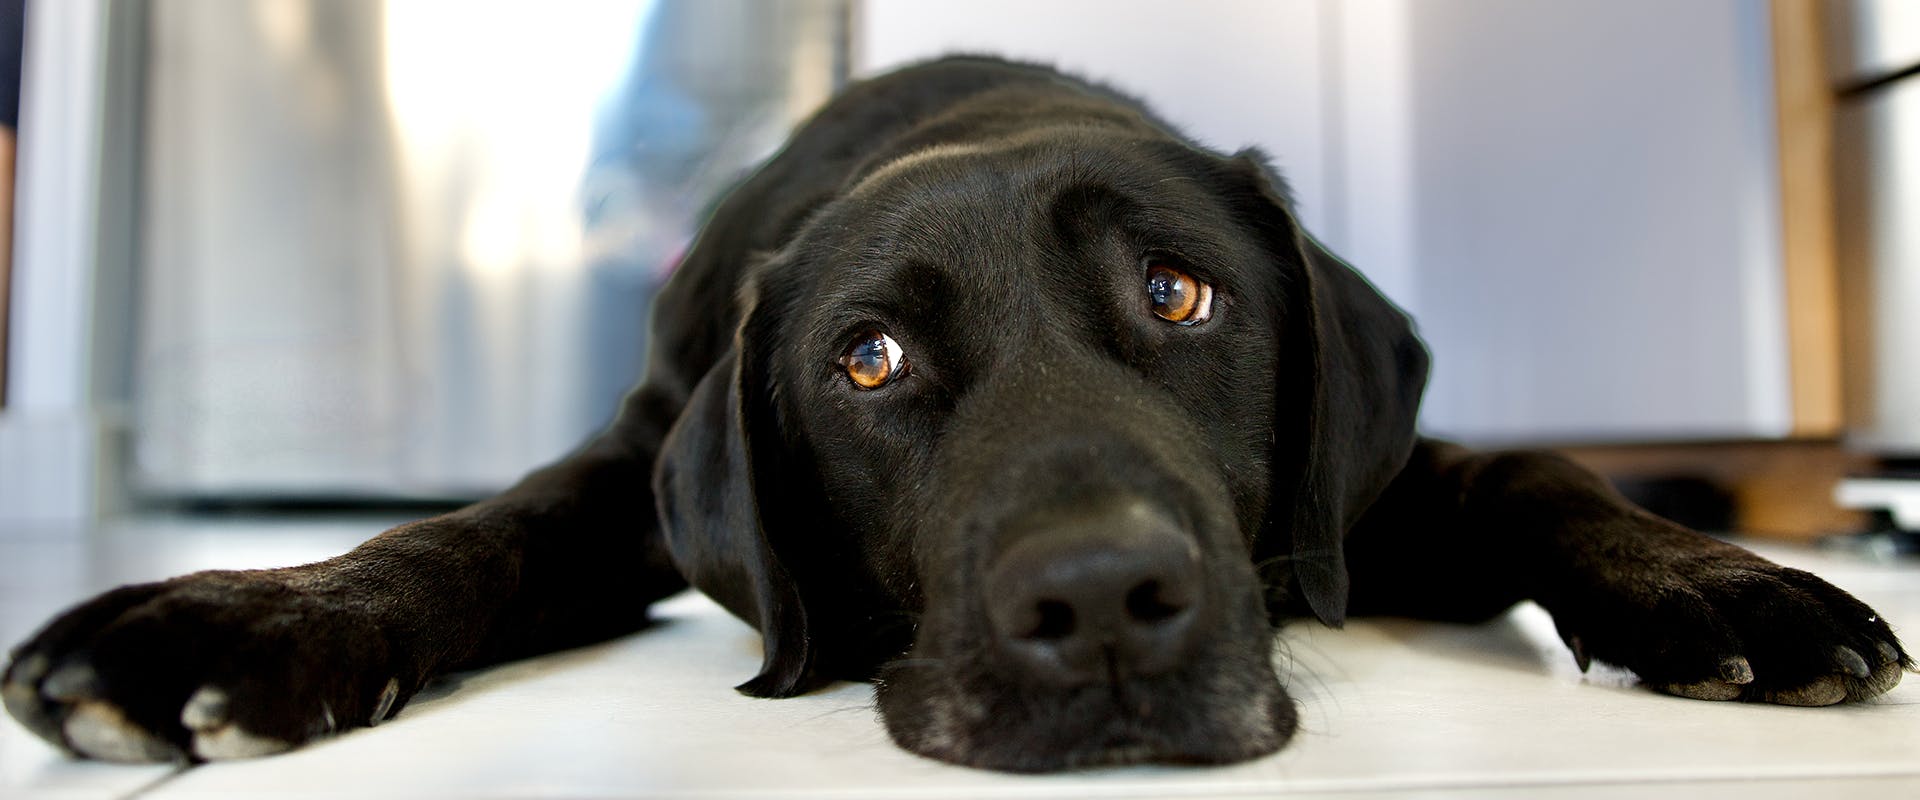 can therapy dogs sense sadness